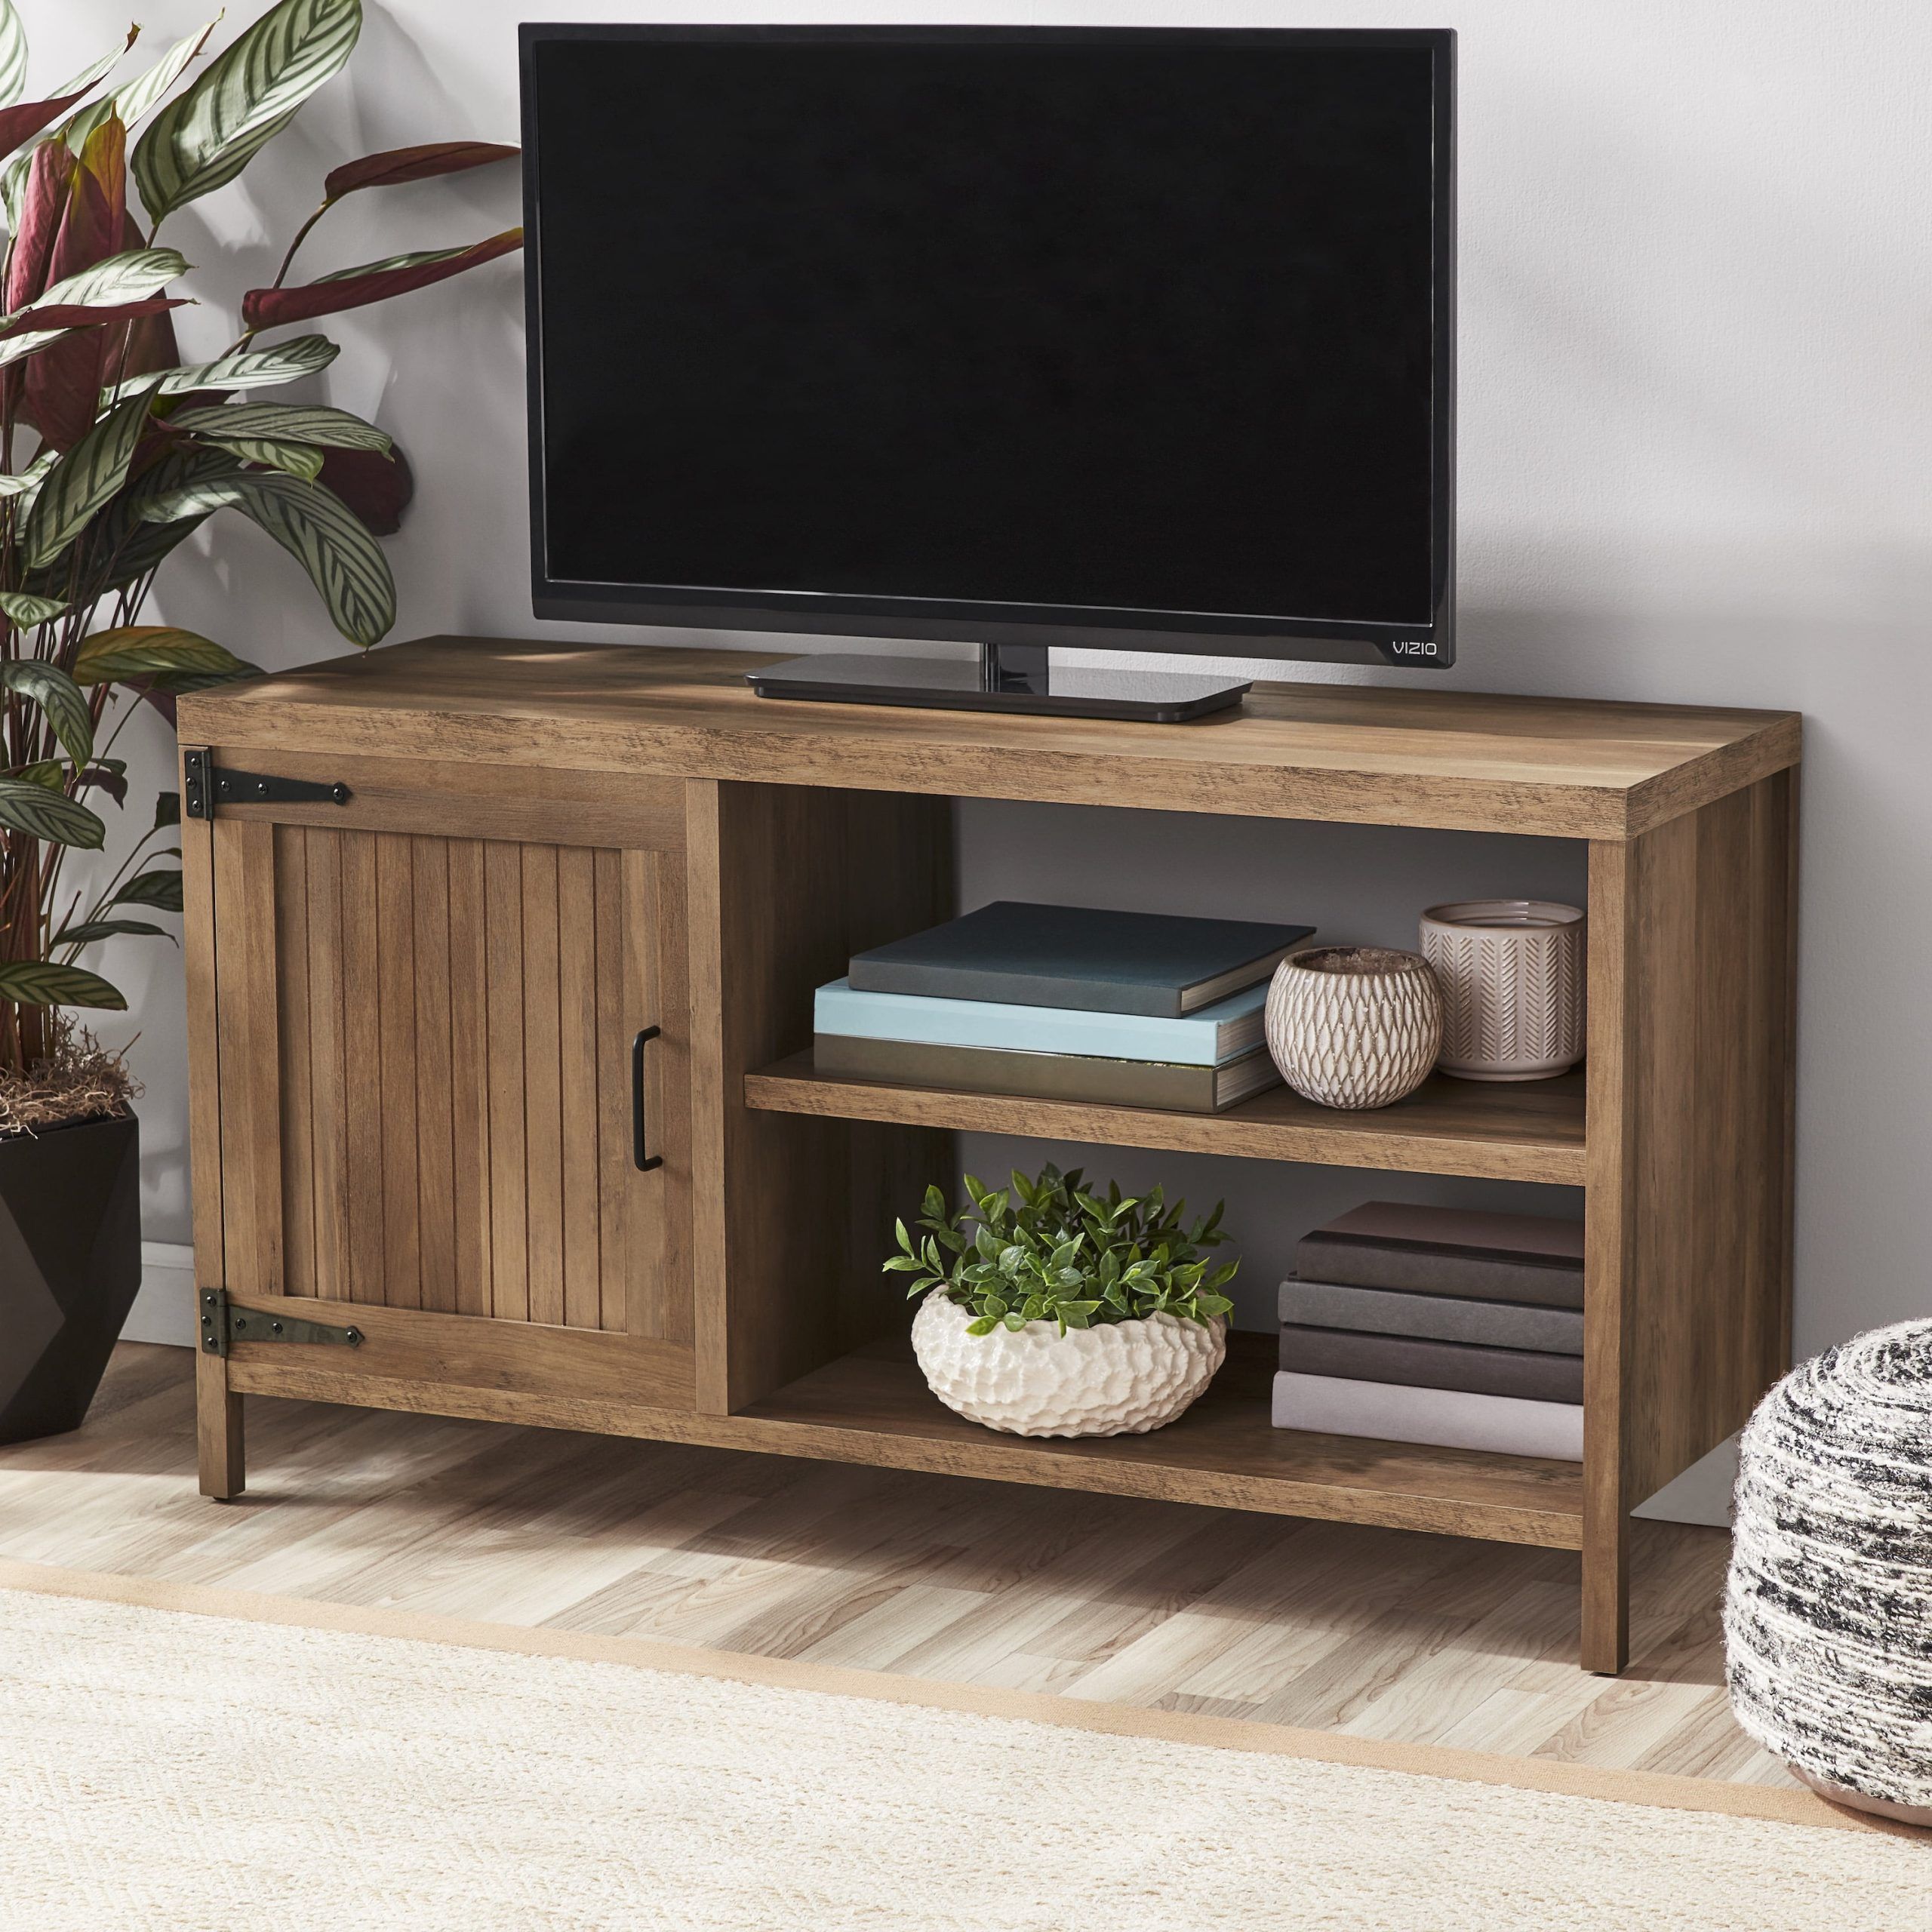 Mainstays Farmhouse Tv Stand For Tvs Up To 50", Rustic Weathered Oak –  Walmart Throughout Farmhouse Stands For Tvs (View 11 of 15)